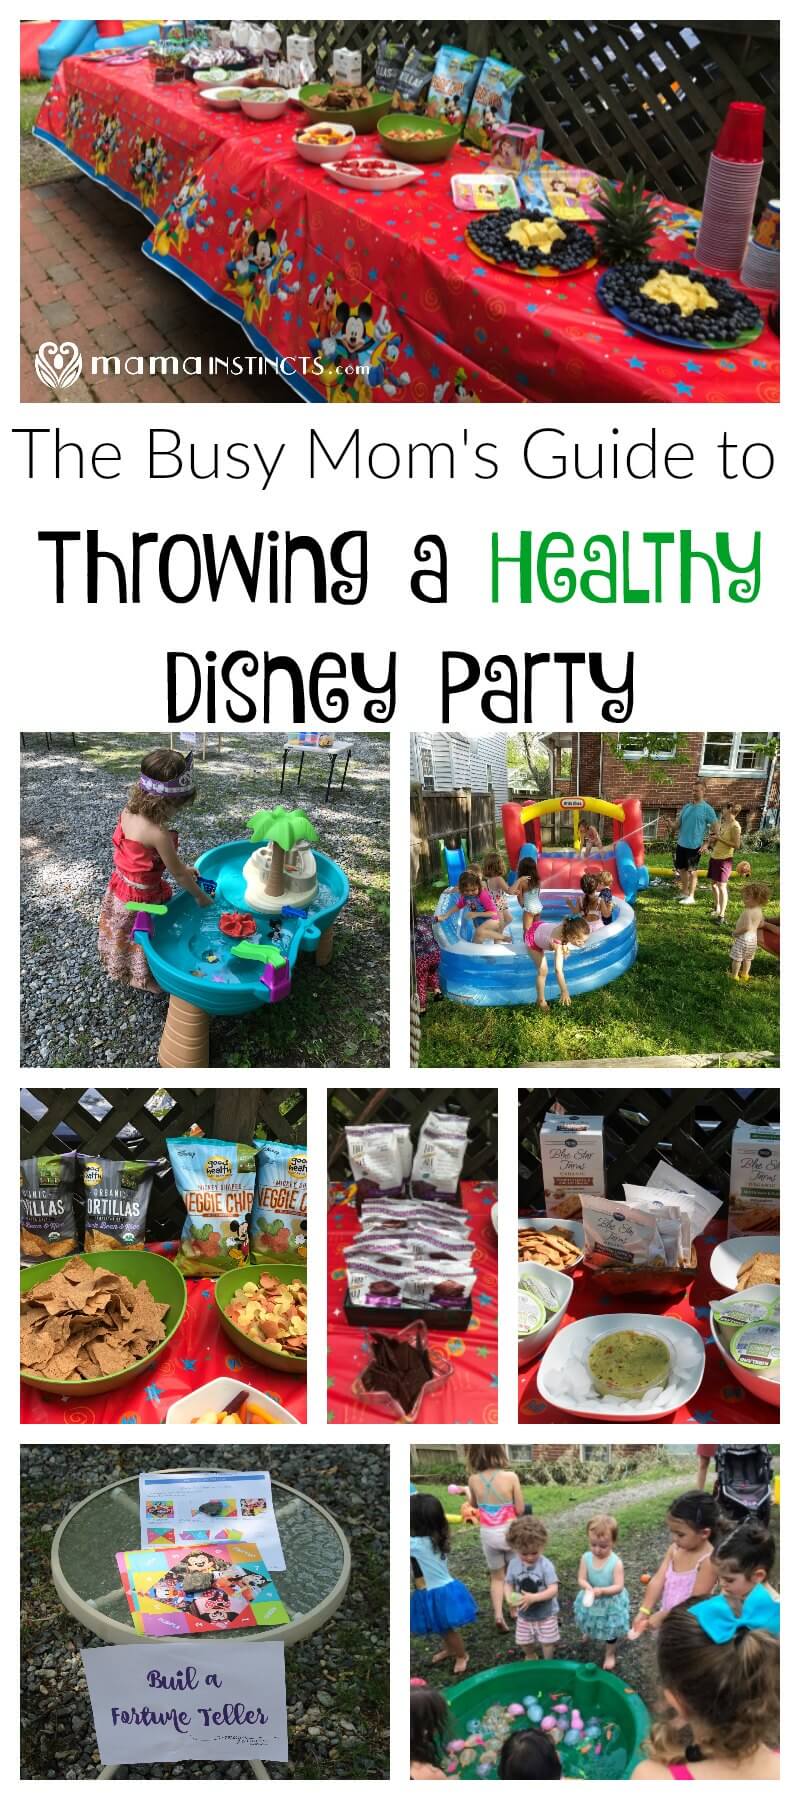 Who says you need lots of time and skills to throw a Disney themed party? Check out this tutorial with ideas on how to throw a Disney party with healthy snacks. #DisneyKids